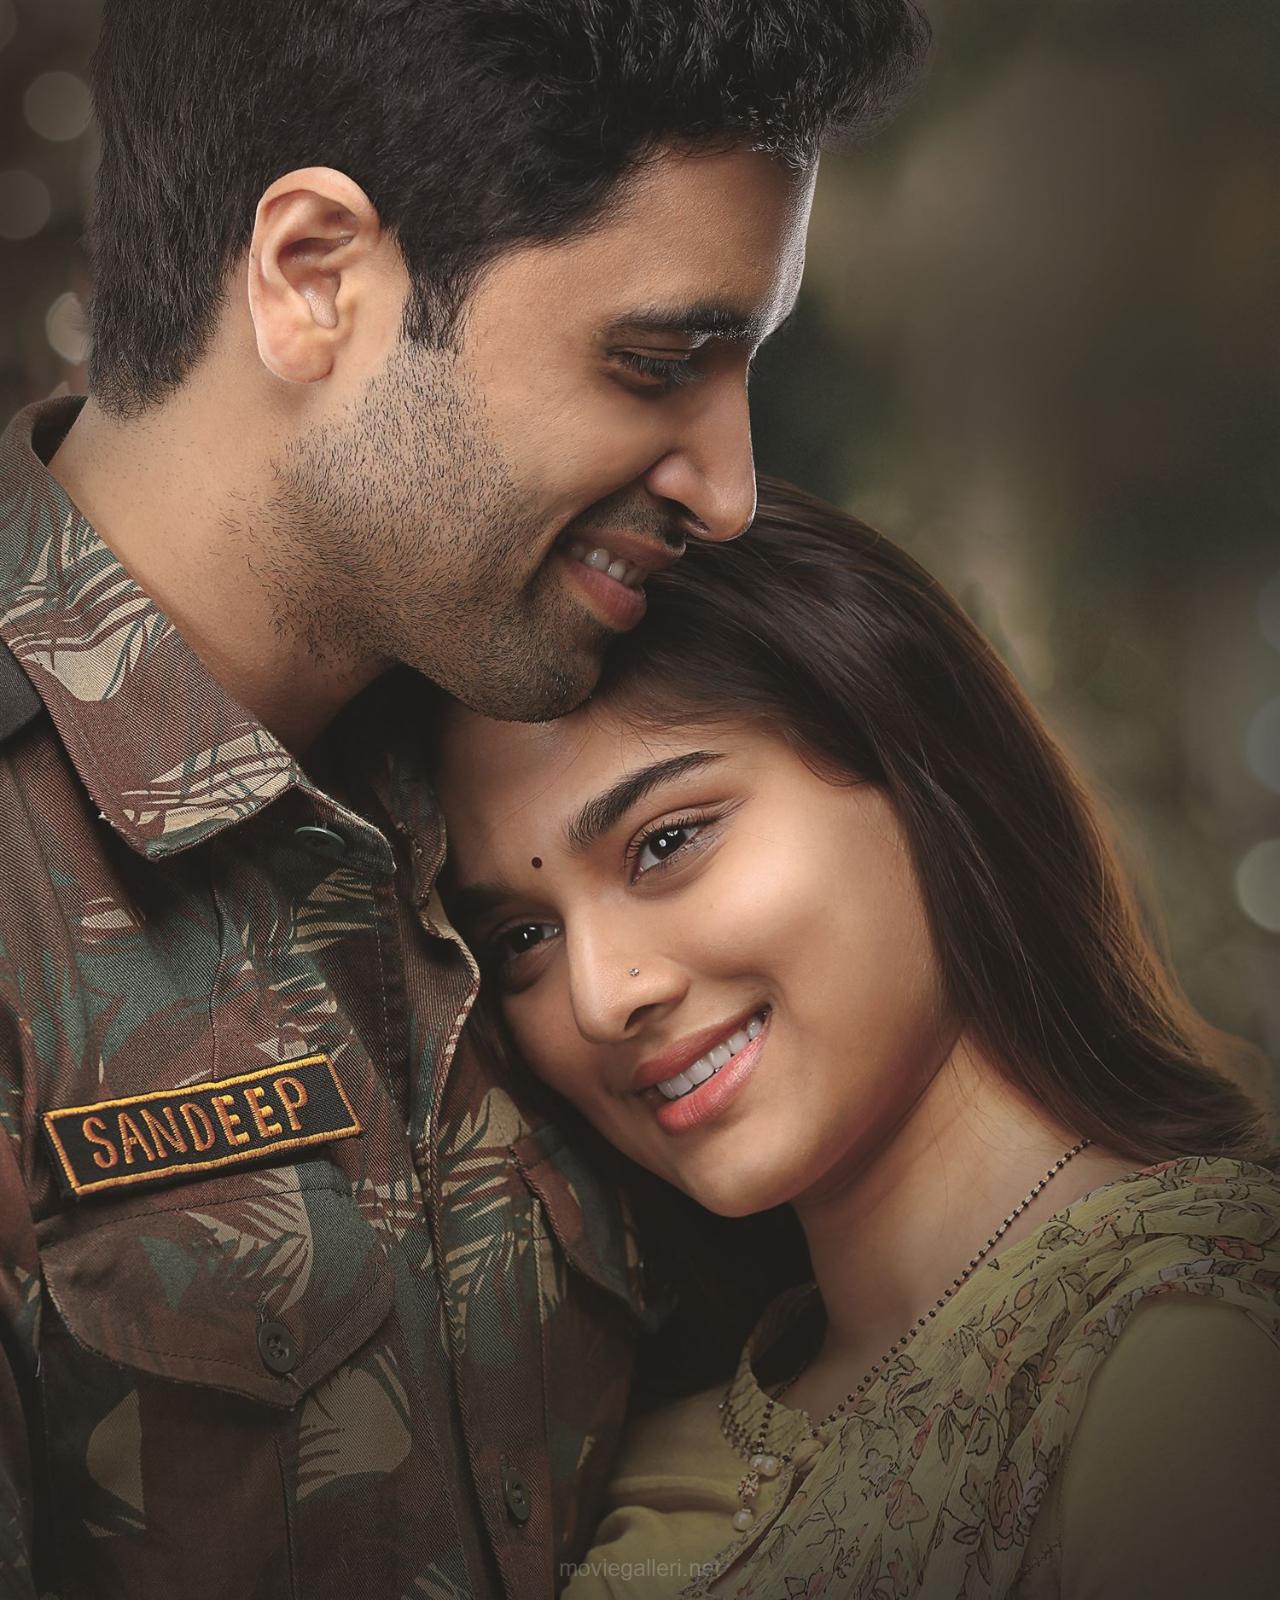 Major
'Major' is based on the life of Major Sandeep Unnikrishnan was martyred during the Mumbai attack in 2008. Starring Adivi Sesh, the film was released earlier this year and was well received by the audience. The brave tale of Major Unnikrishnan is sure to leave you teary-eyed